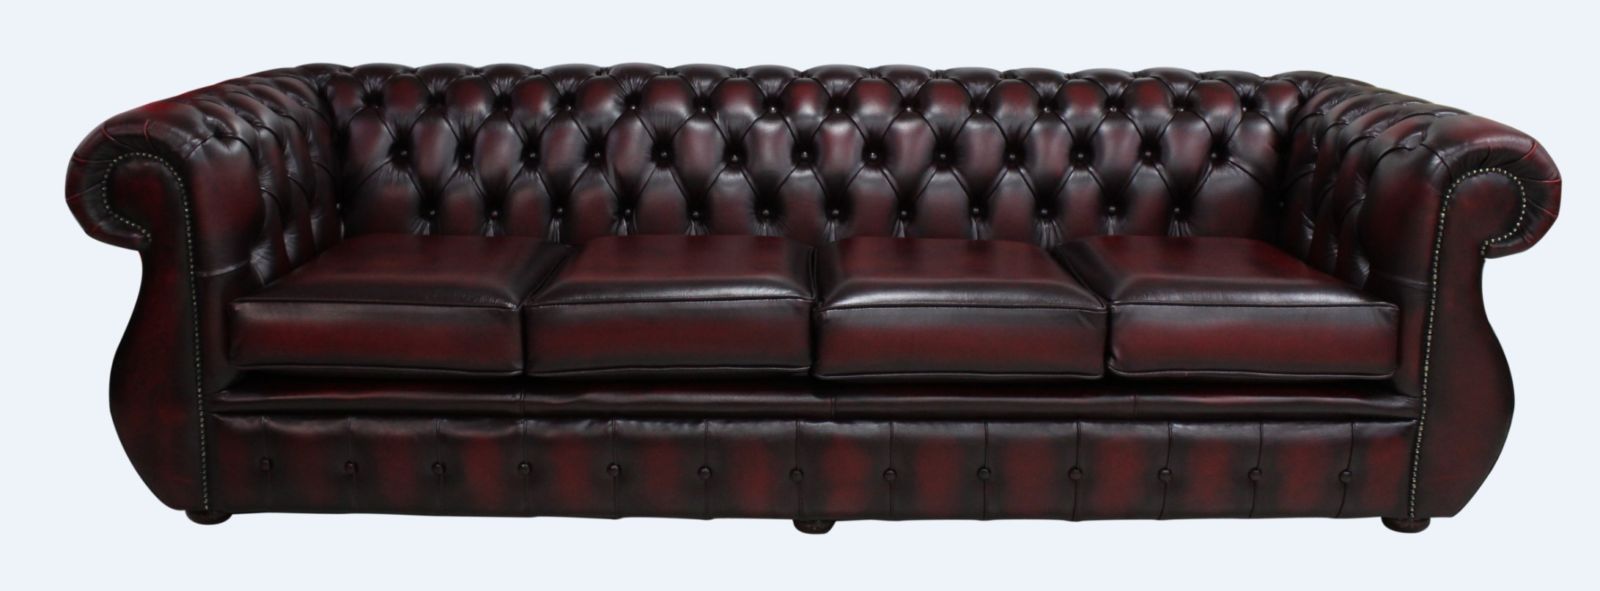 Product photograph of Chesterfield 4 Seater Antique Oxblood Red Leather Sofa In Kimberley Style from Chesterfield Sofas